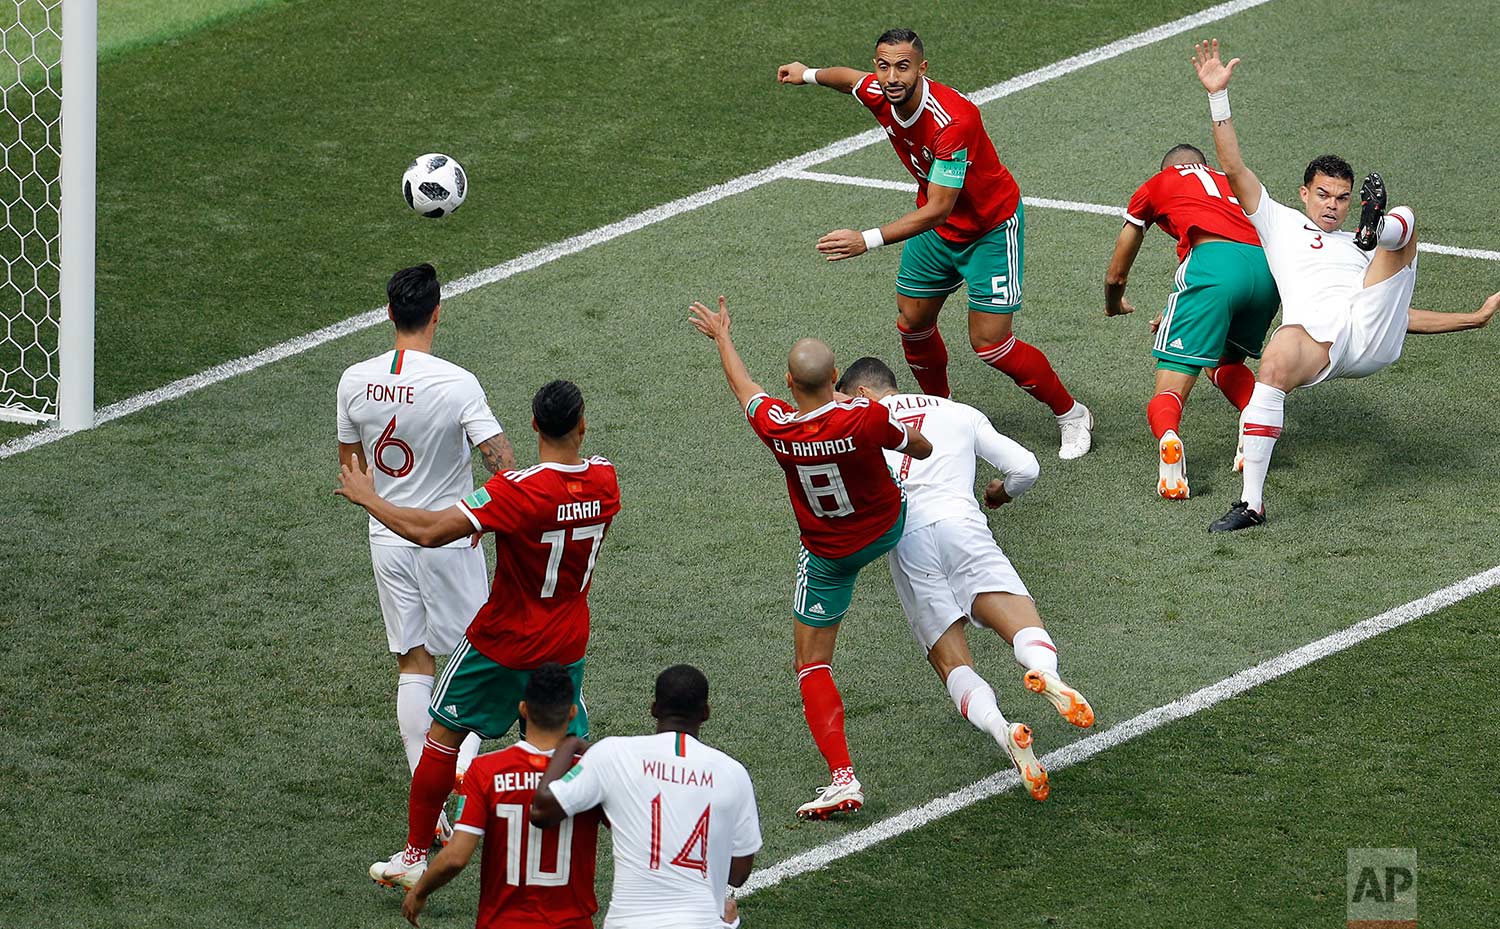  Portugal's Cristiano Ronaldo, center, heads the ball to score the opening goal during the group B match between Portugal and Morocco at the 2018 soccer World Cup in the Luzhniki Stadium in Moscow, Russia, Wednesday, June 20, 2018. (AP Photo/Victor C